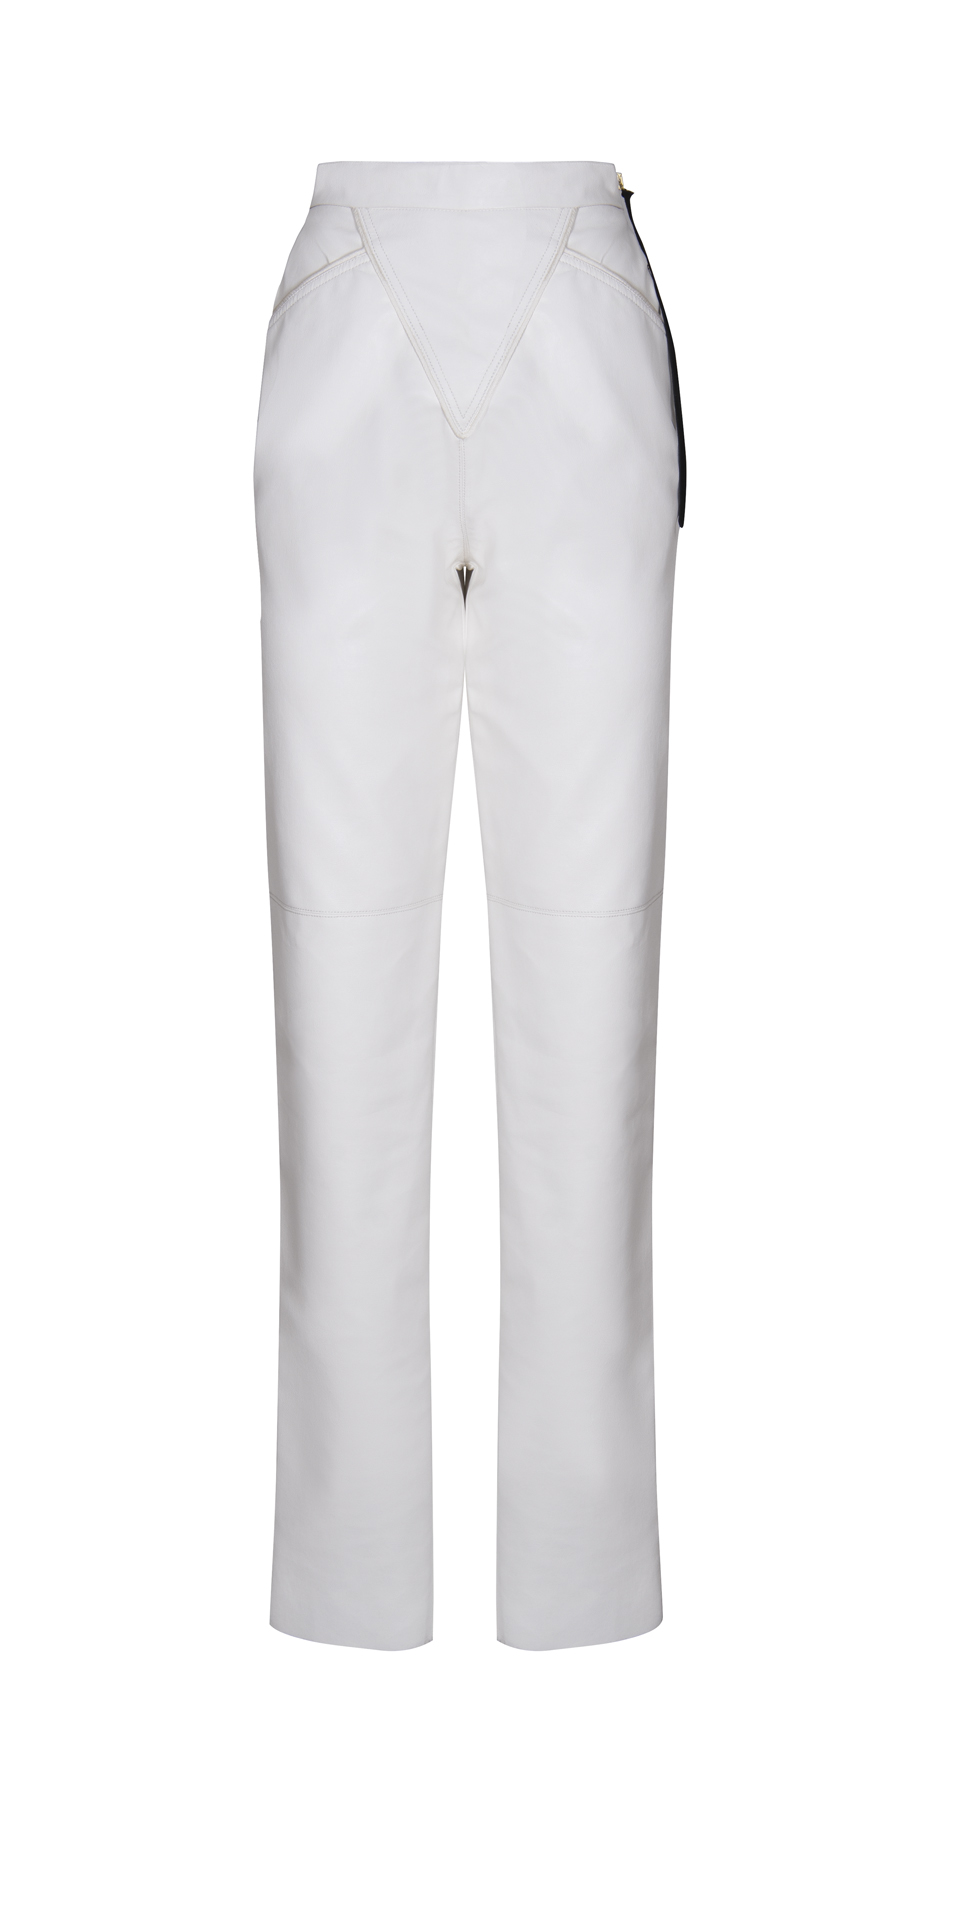 SS21 – THE TRILOGY PANT LEATHER WHITE